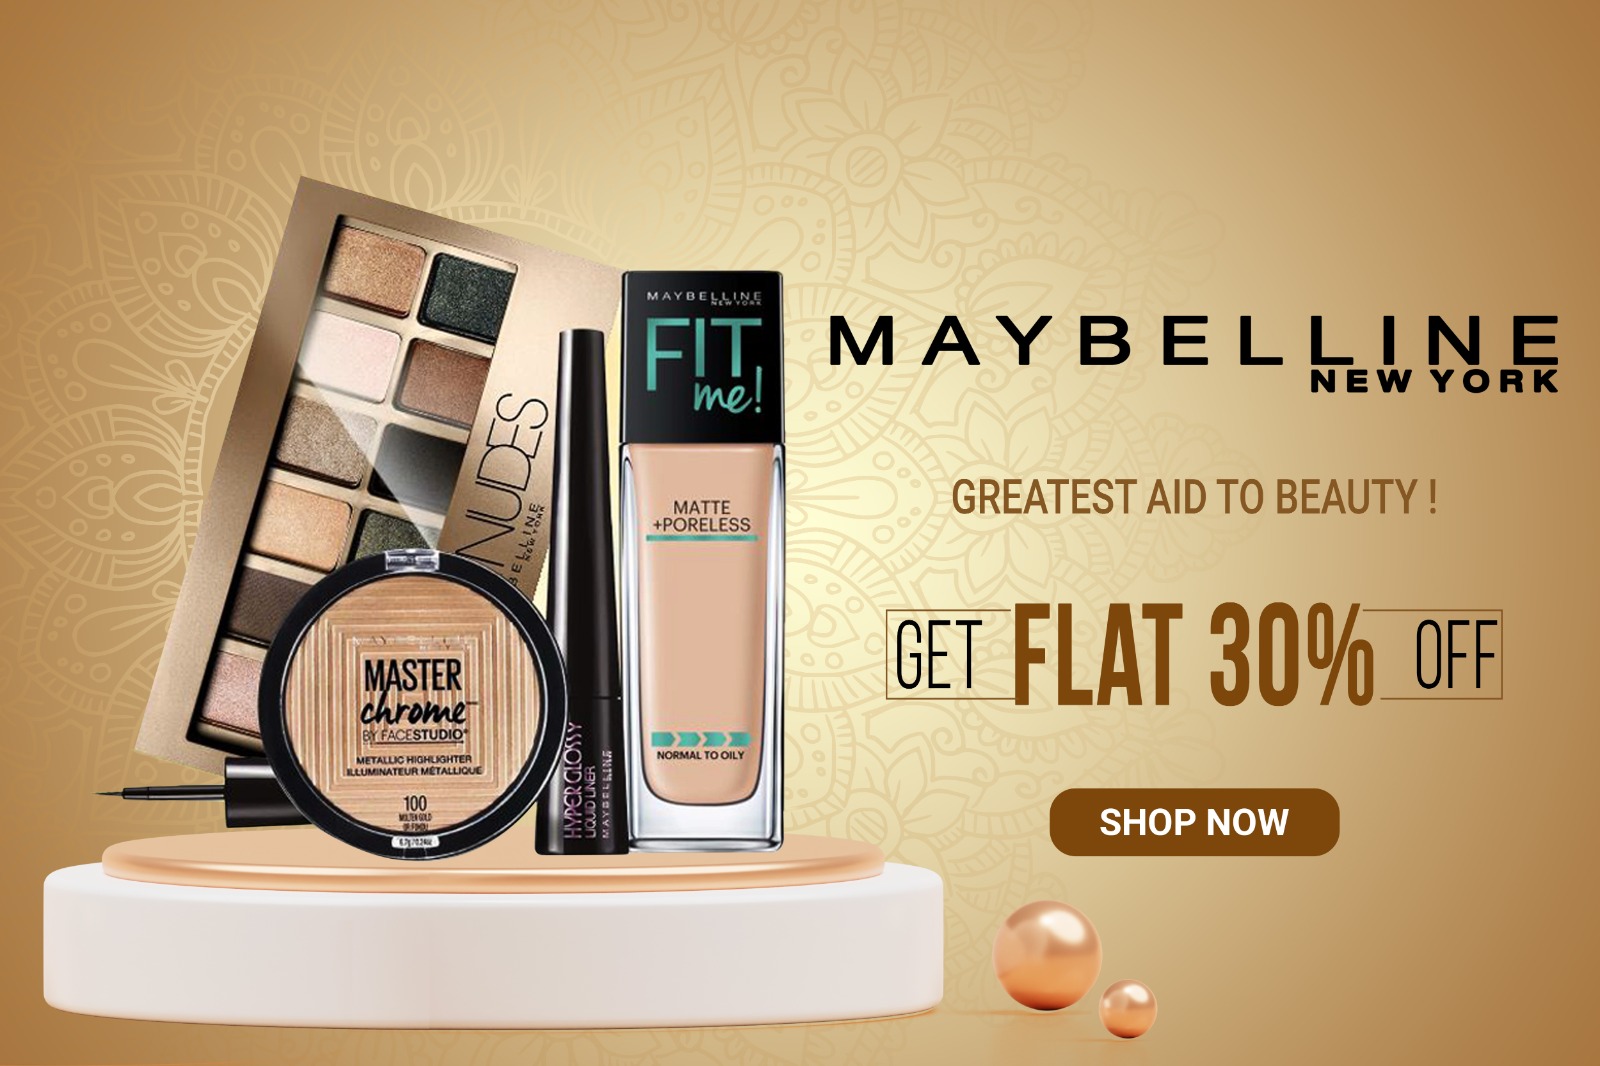 YOUTHiD Maybelline makeup products online